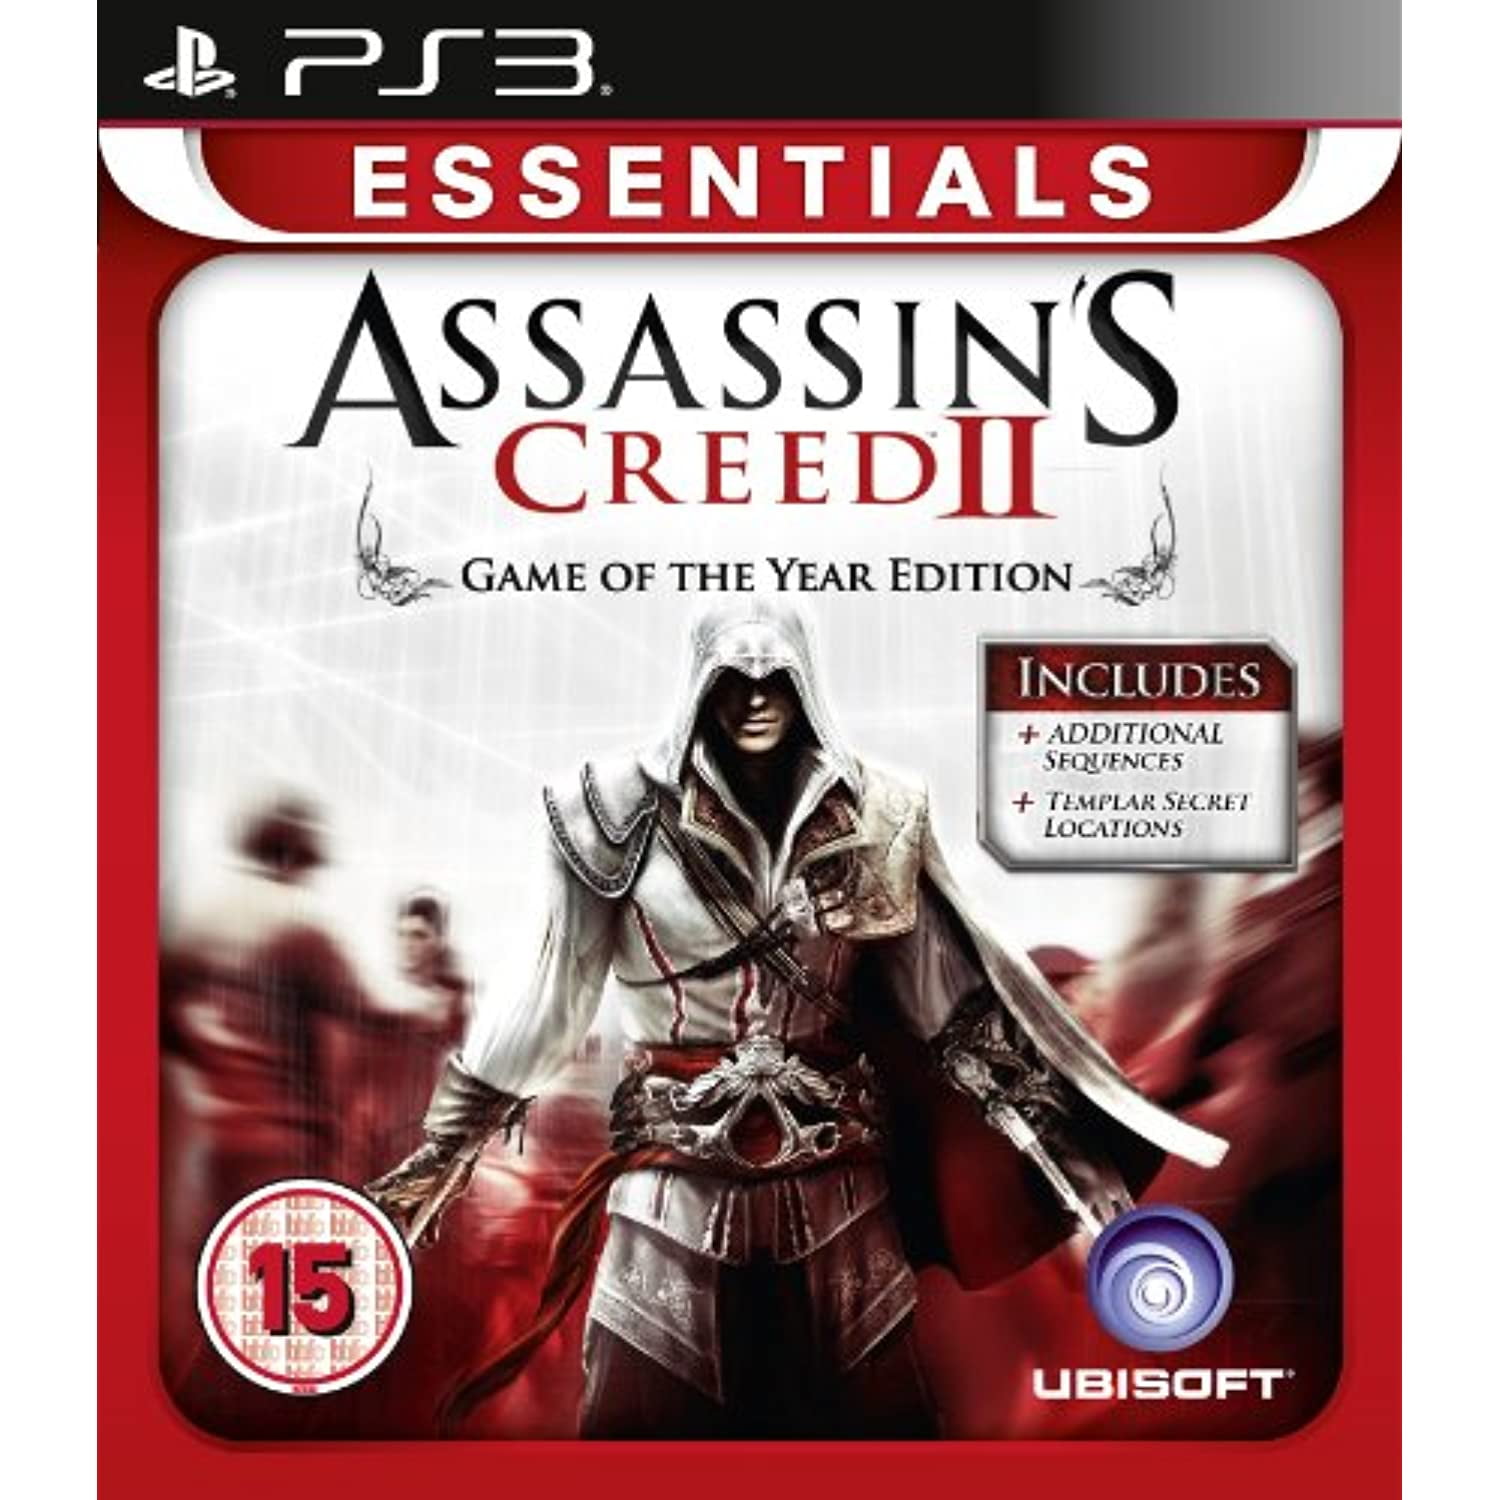 ASSASSIN'S CREED GAME PS3  Assassins creed game, Assassins creed